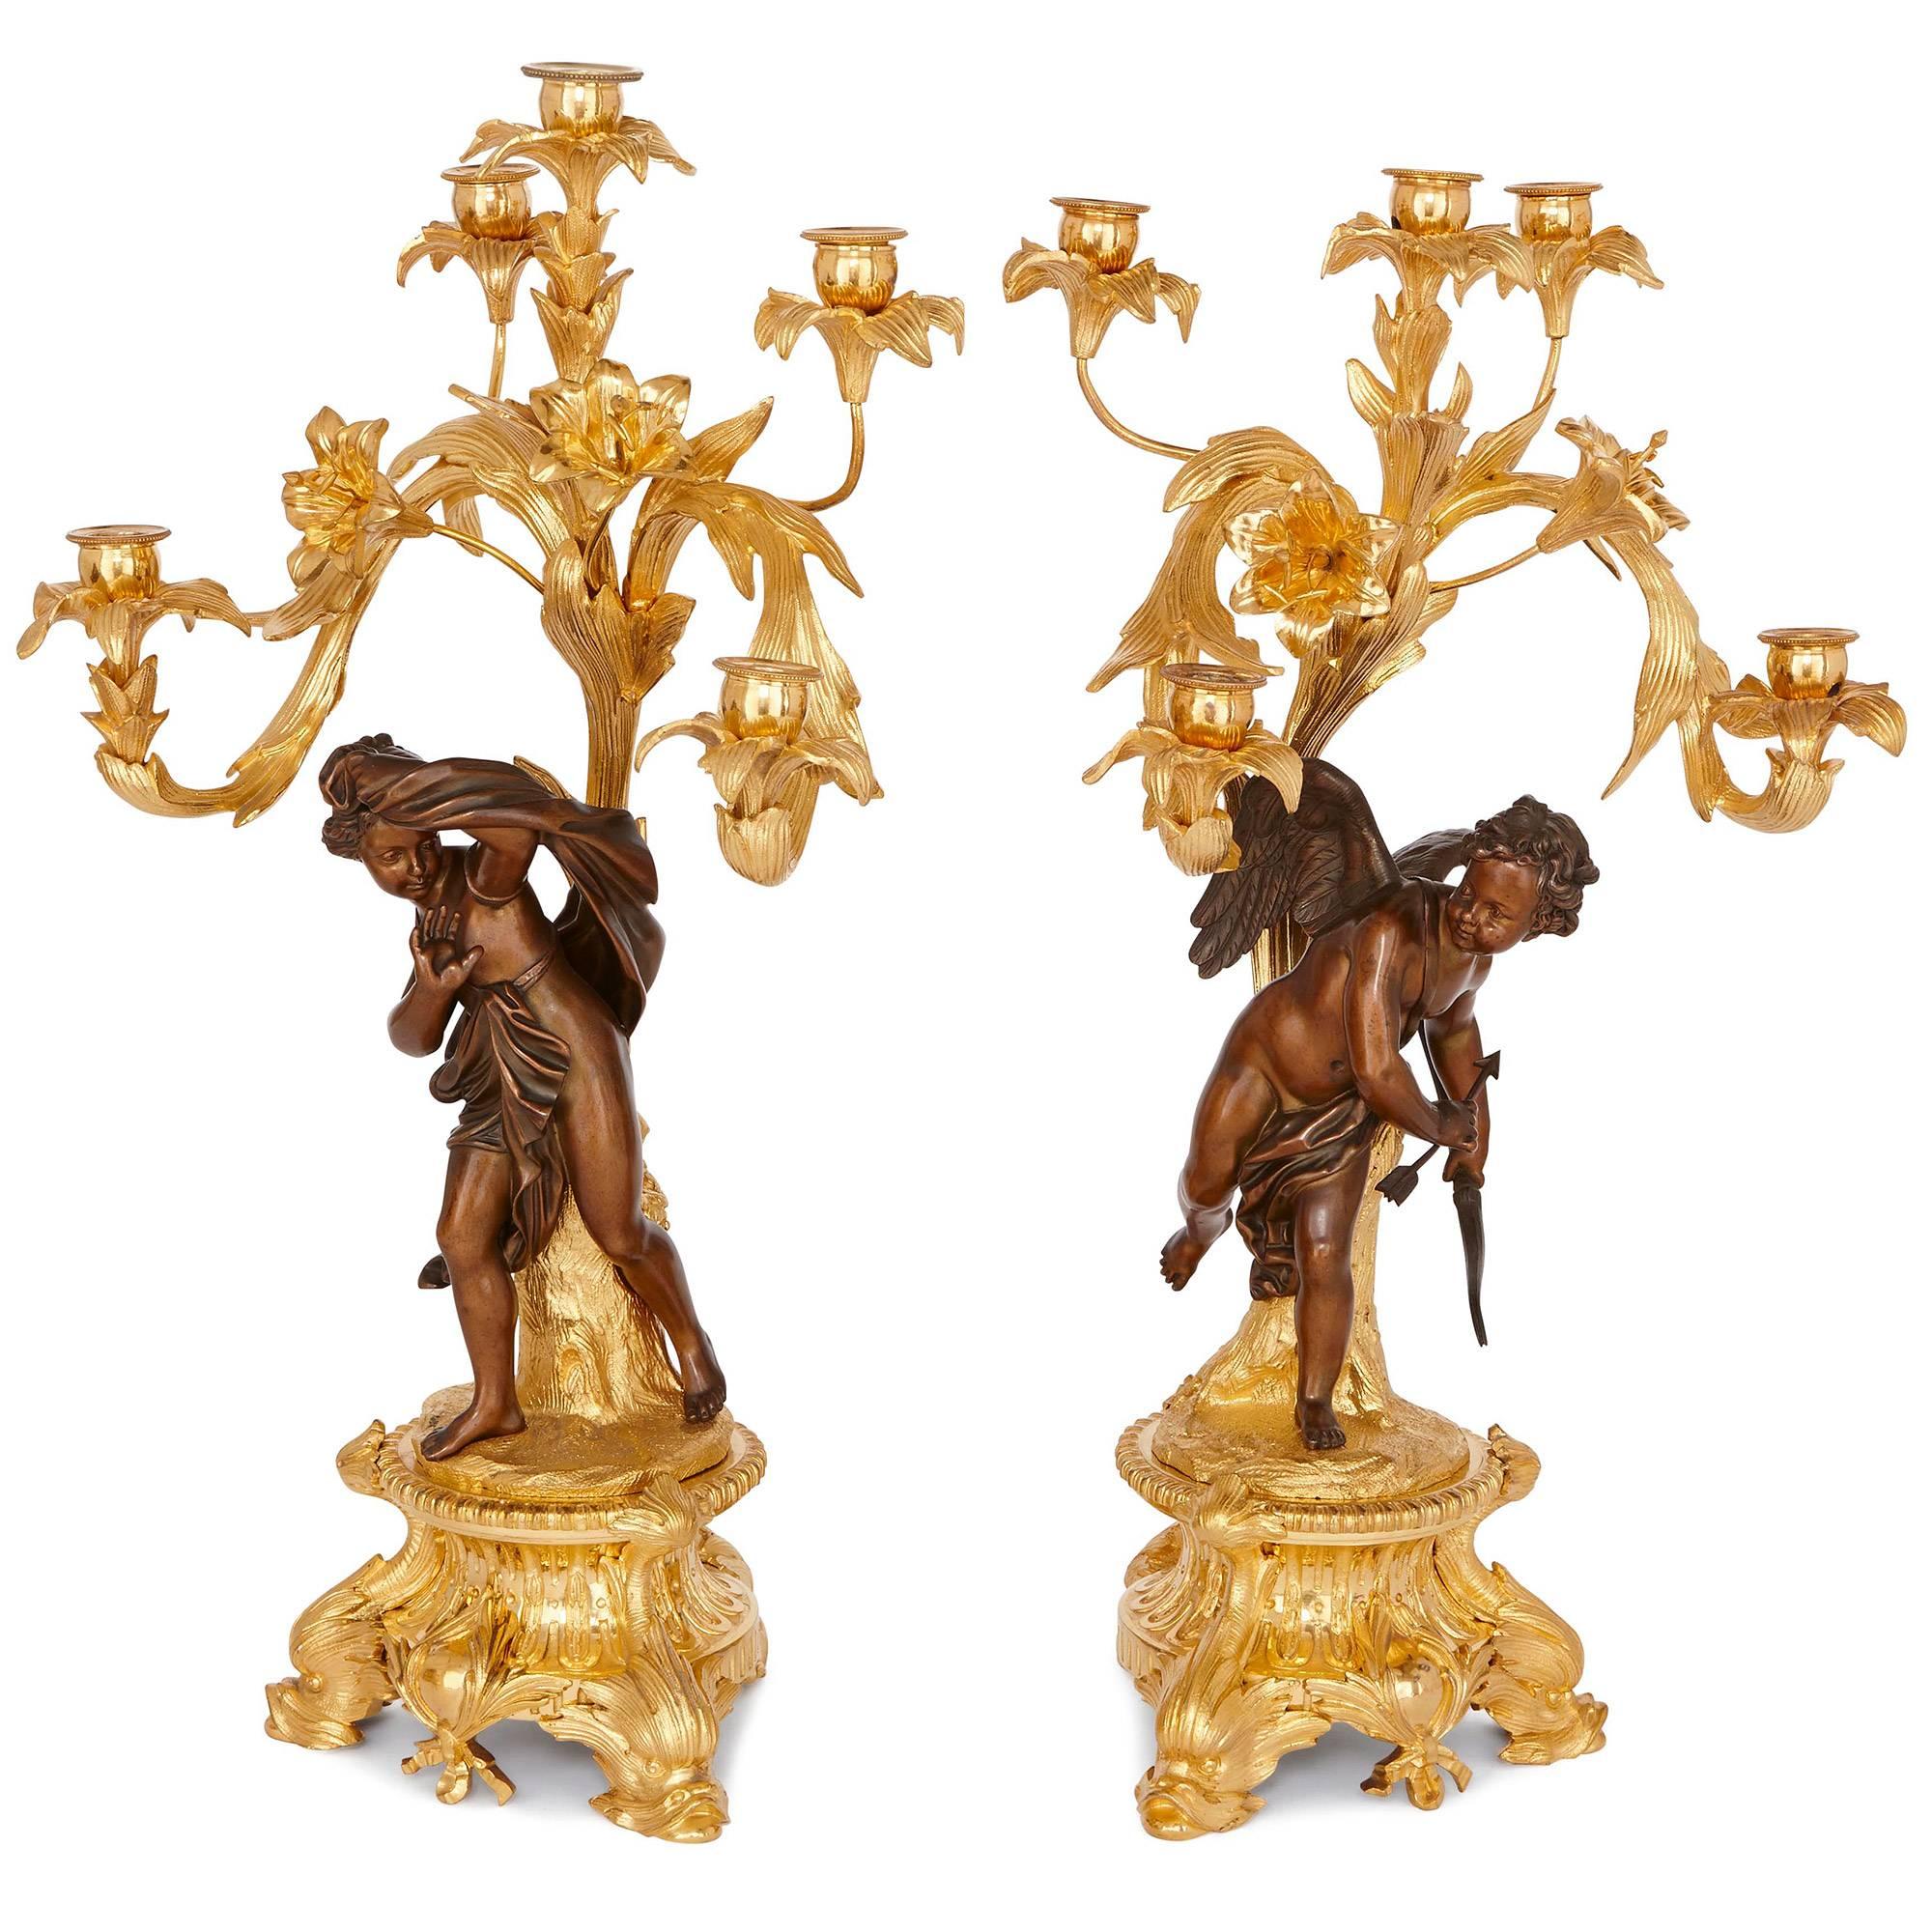 Napoleon III Period Ormolu and Patinated Bronze Clock Set by Picard In Excellent Condition For Sale In London, GB